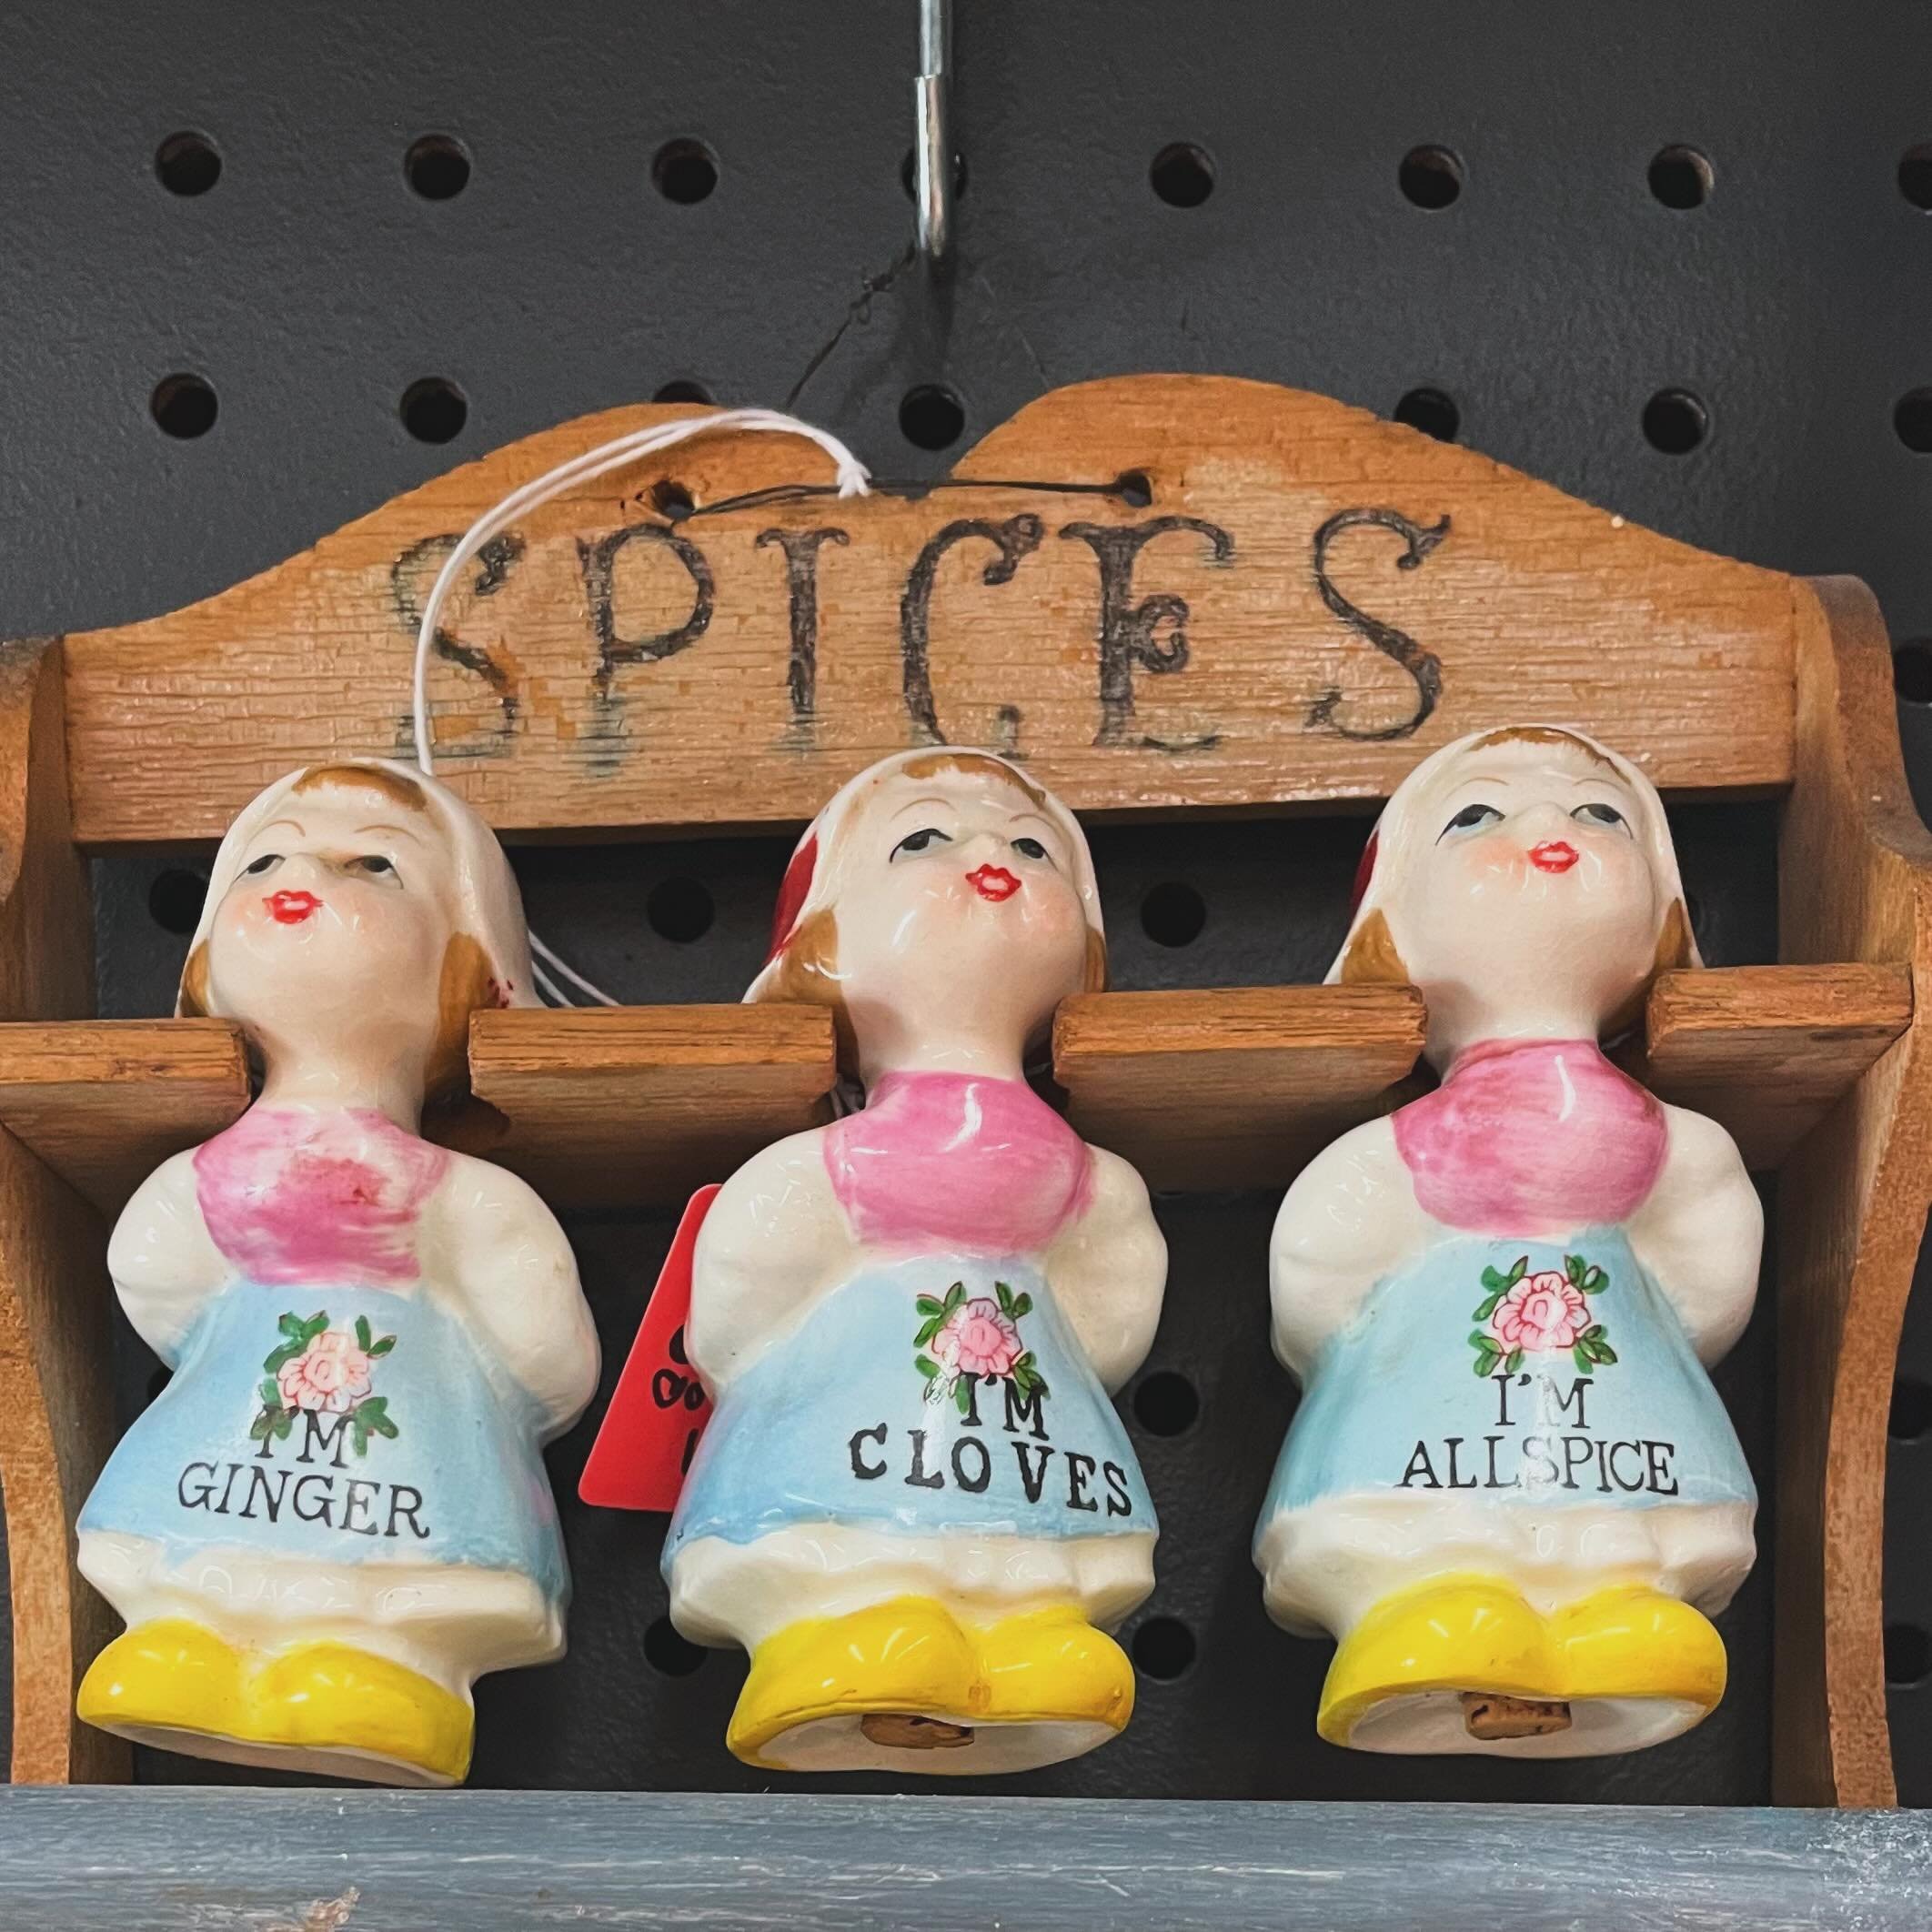 The Spice Girls are hanging out at River City Trading Post today! #antique #vintage #jenks #oklahoma #spicegirls